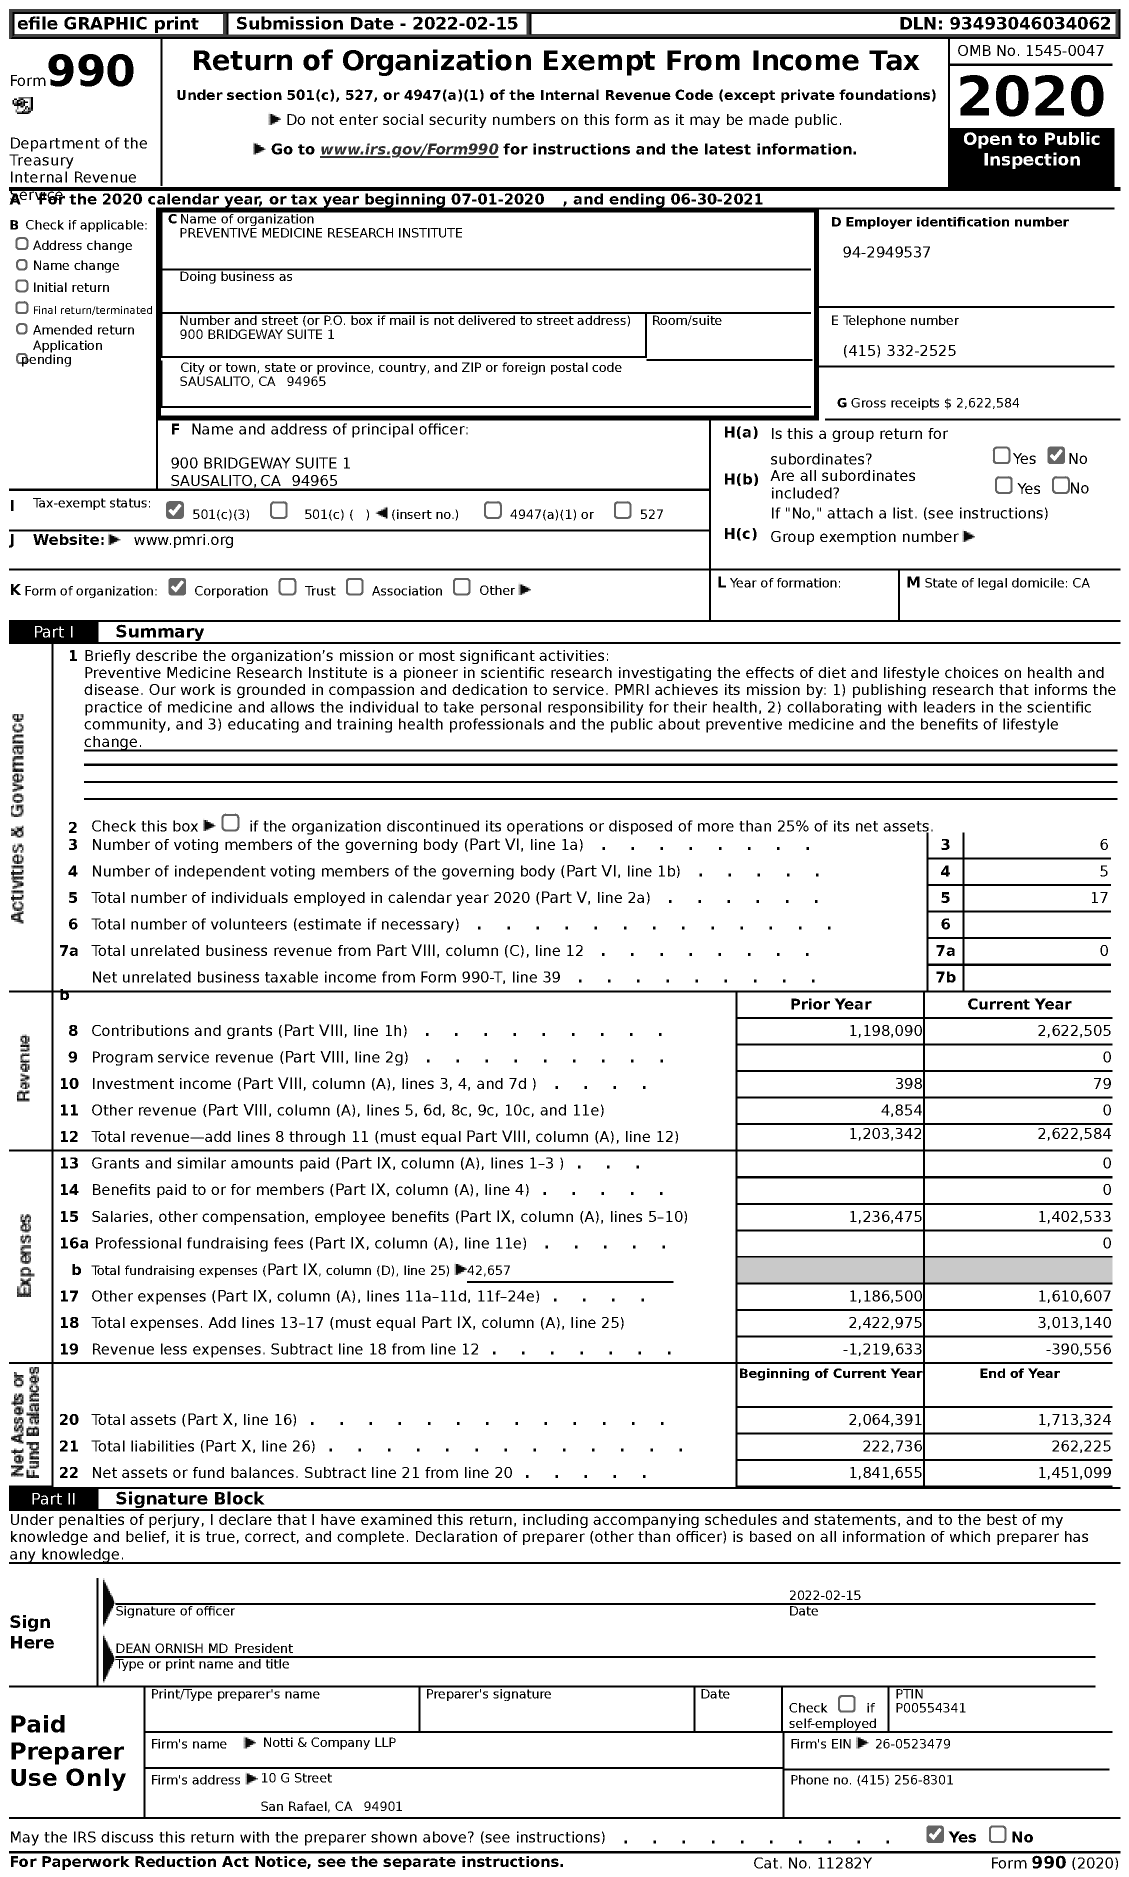 Image of first page of 2020 Form 990 for Preventive Medicine Research Institute